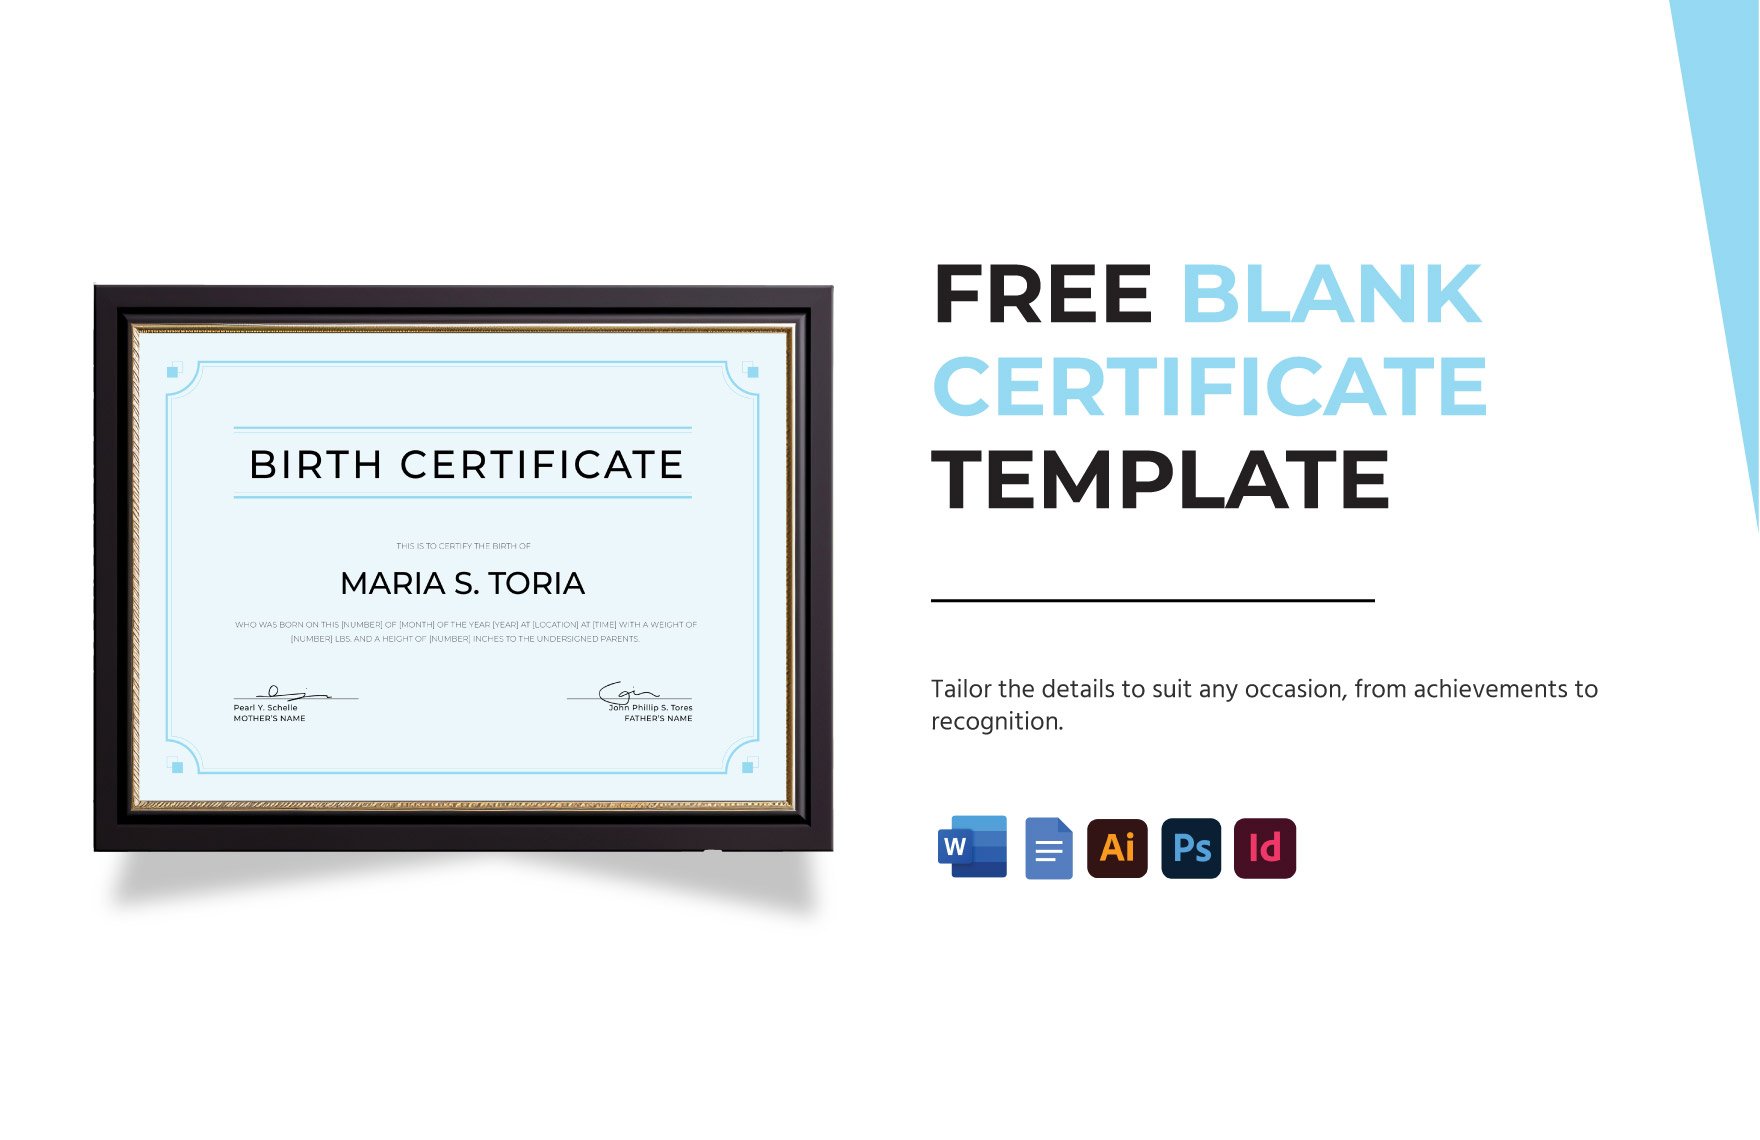 Free Blank Birth Certificate Template in Word, Google Docs, PDF, Illustrator, PSD, InDesign